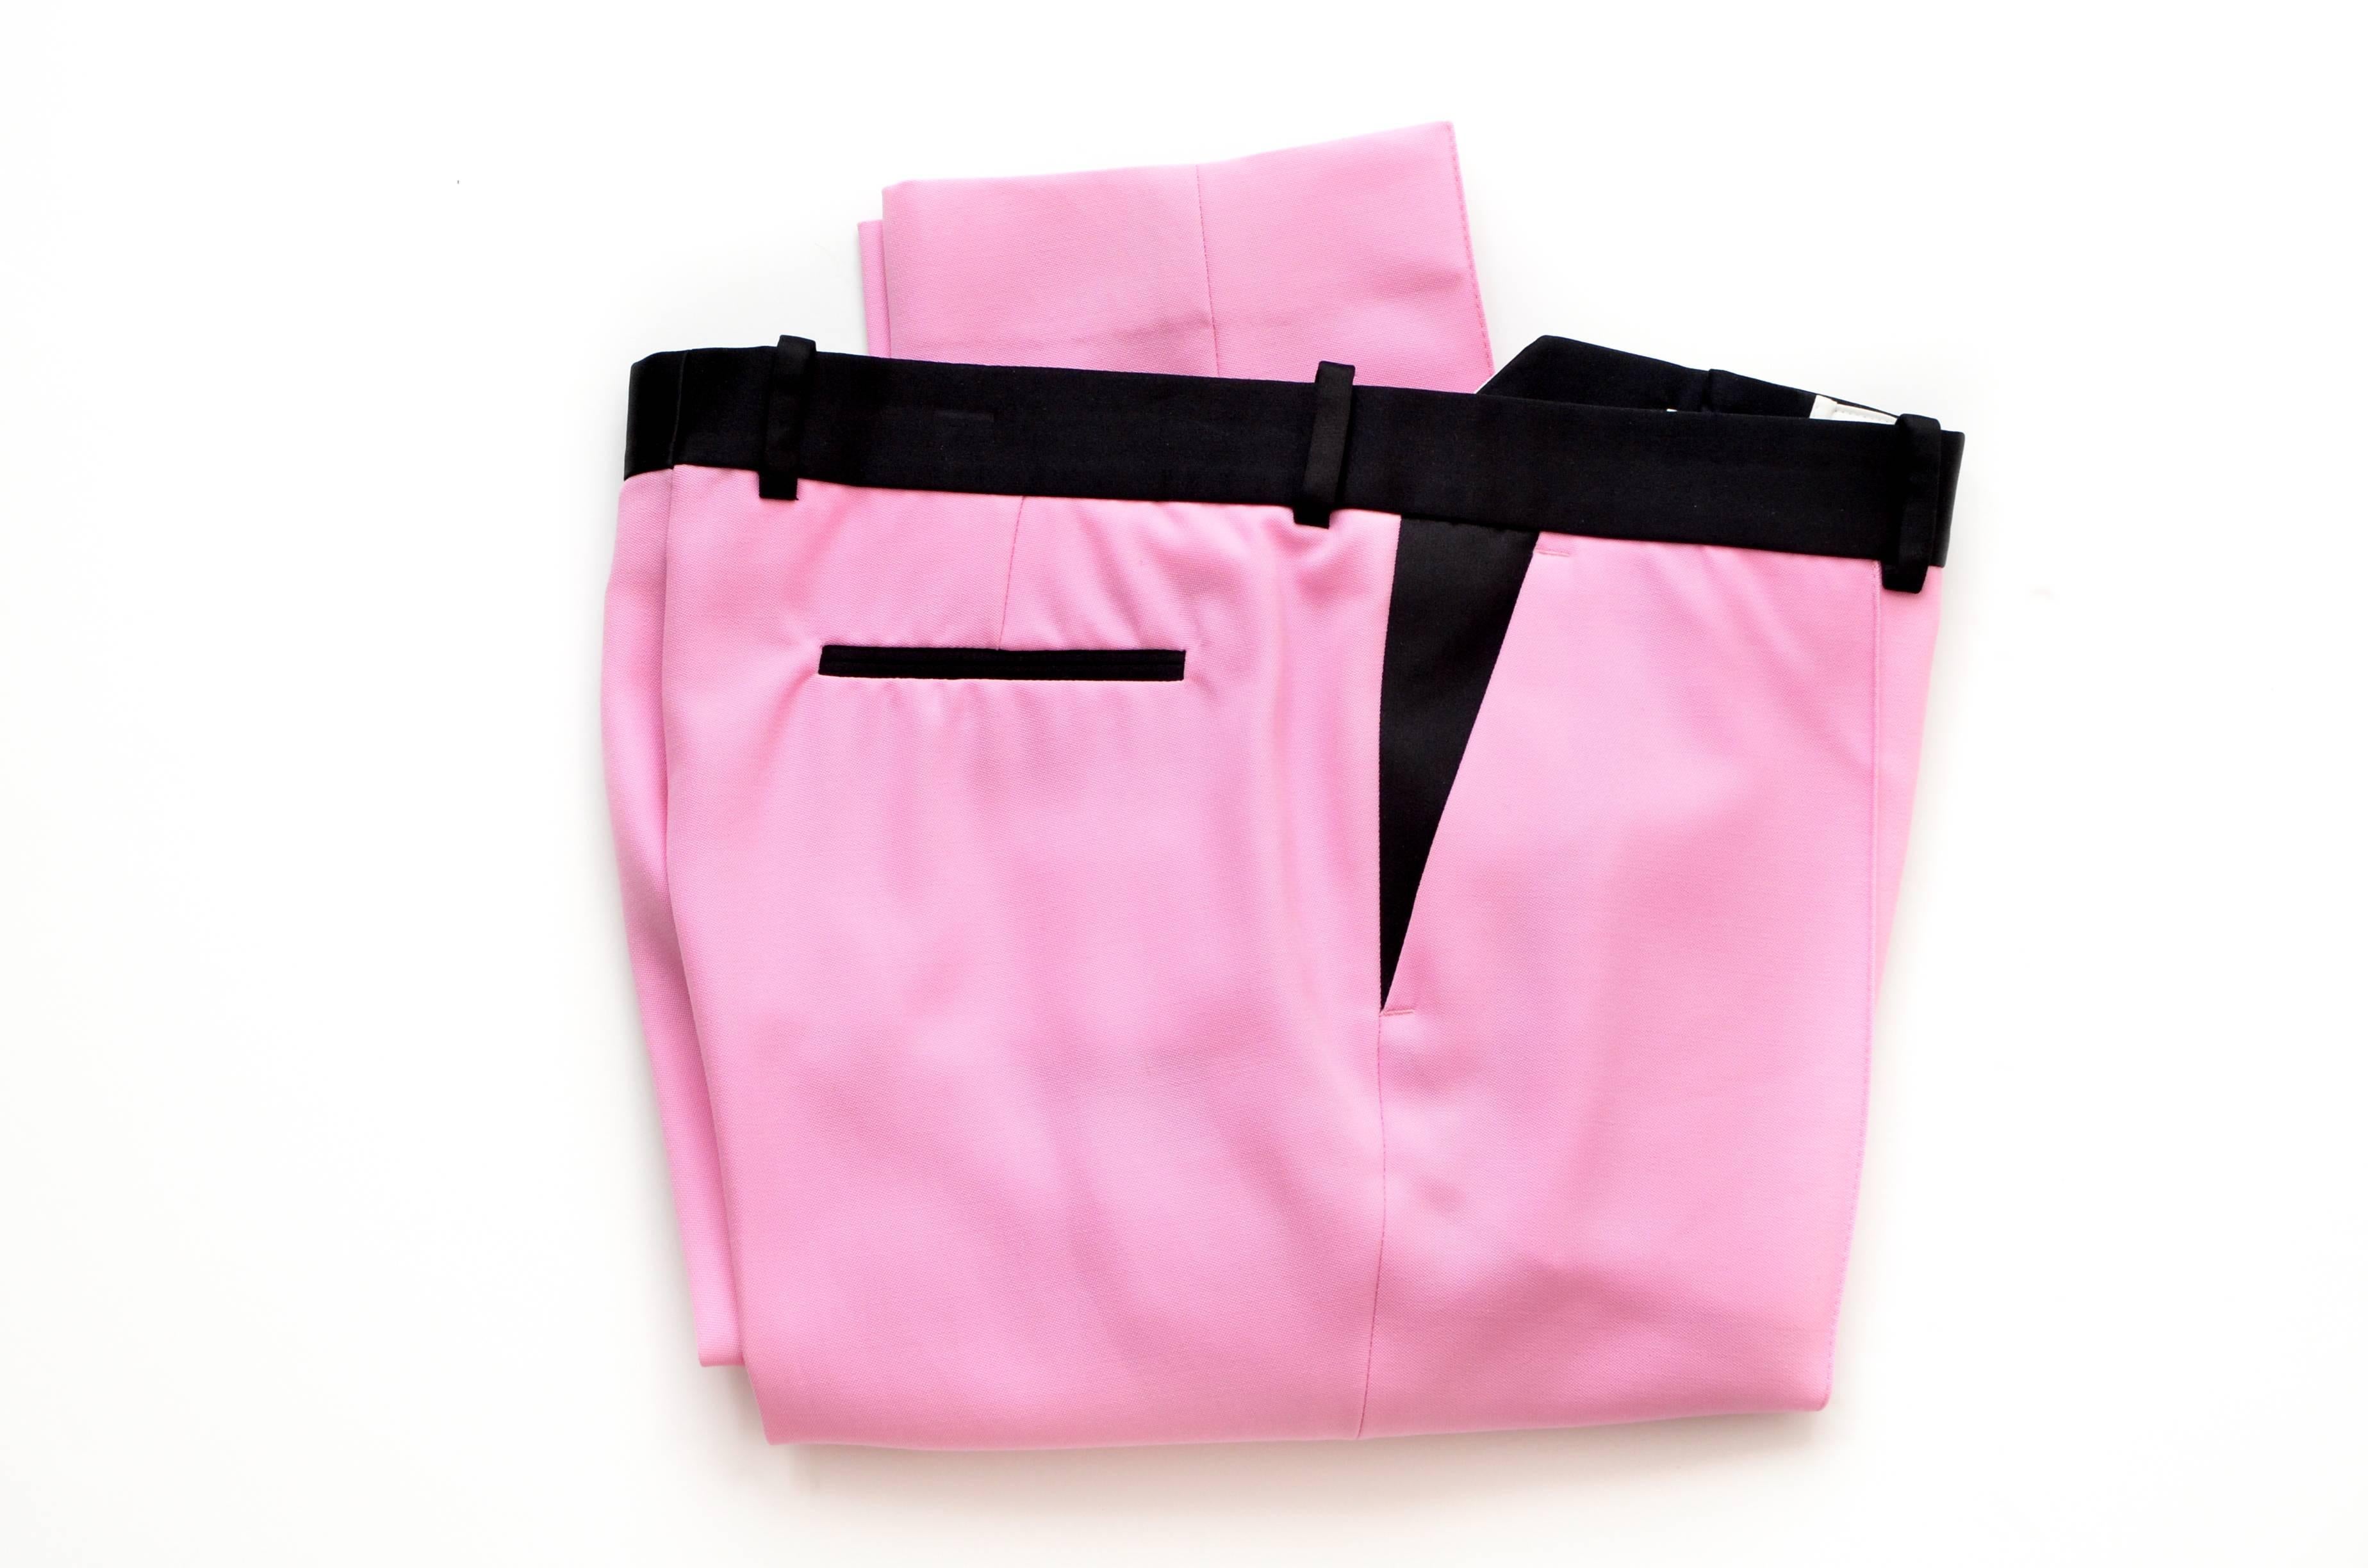 Celine fall 2011 collection pants.
Beautiful Pink with black mix.
New with tags.Size 42.
Made in France.
Waist 35